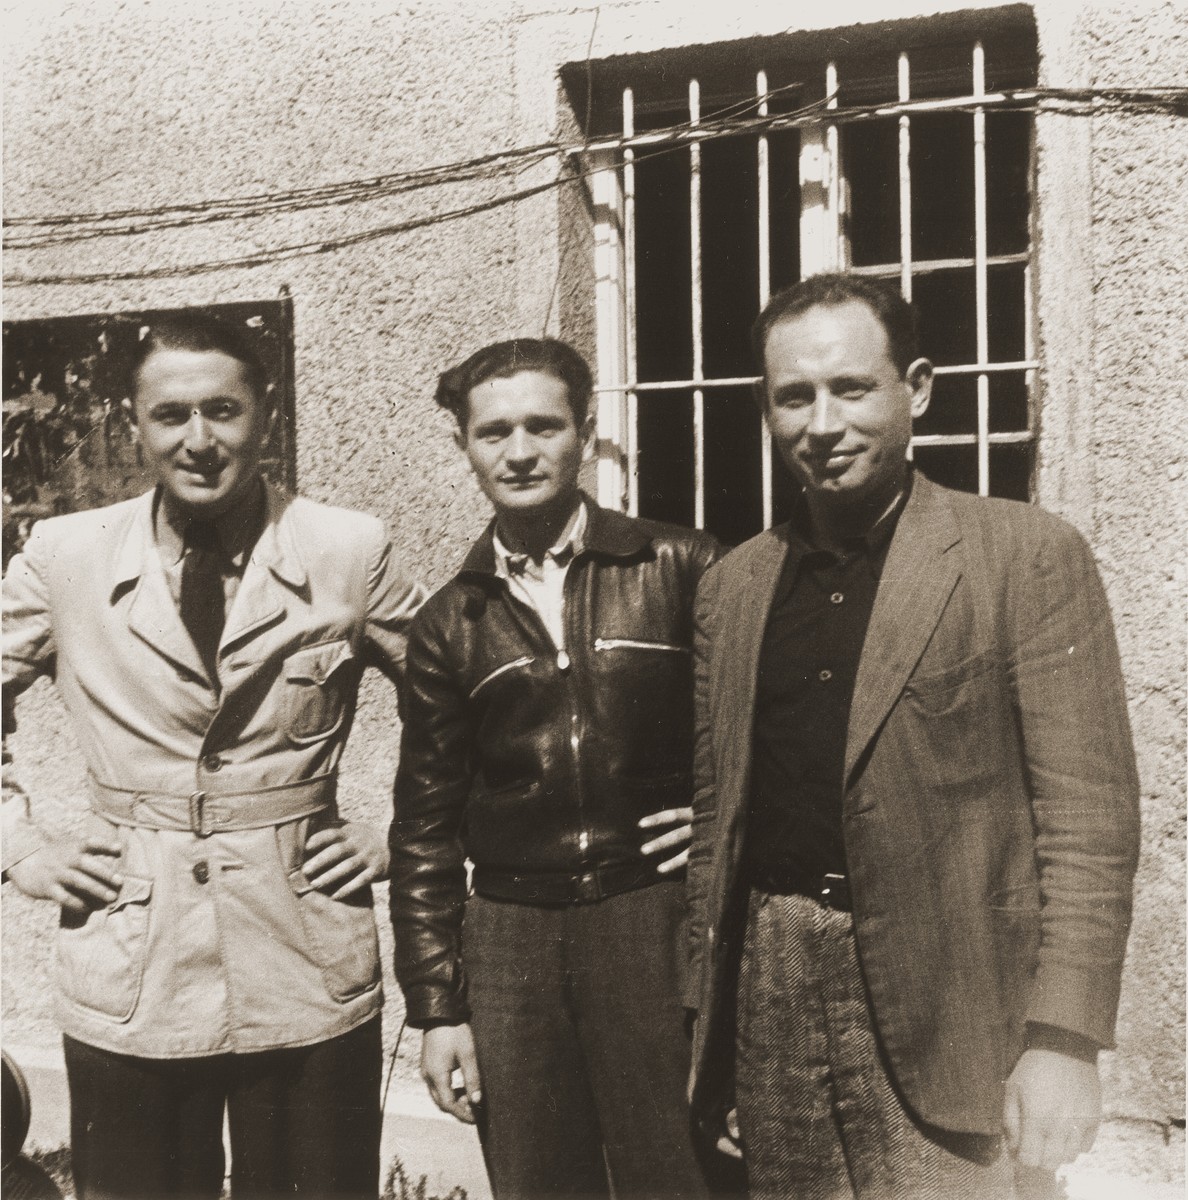 Three Jewish DPs, who survived both the Kovno ghetto and Dachau concentration camp, pose together at the Saint Ottilien Hospital displaced persons camp.  

On the left is Max Lurie.